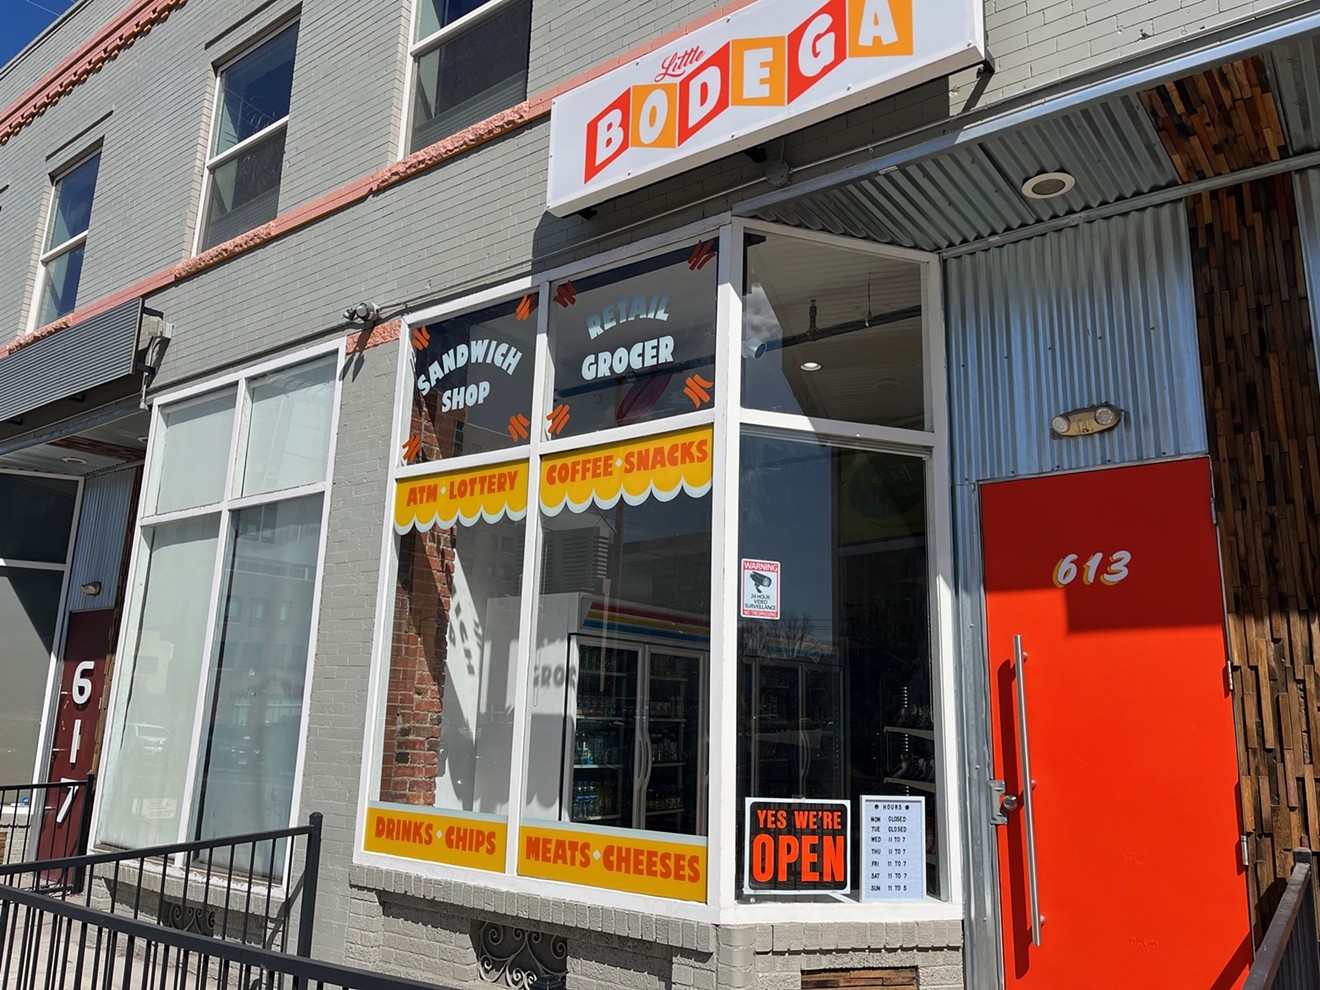 Little Bodega is open in Five Points after months of planning.